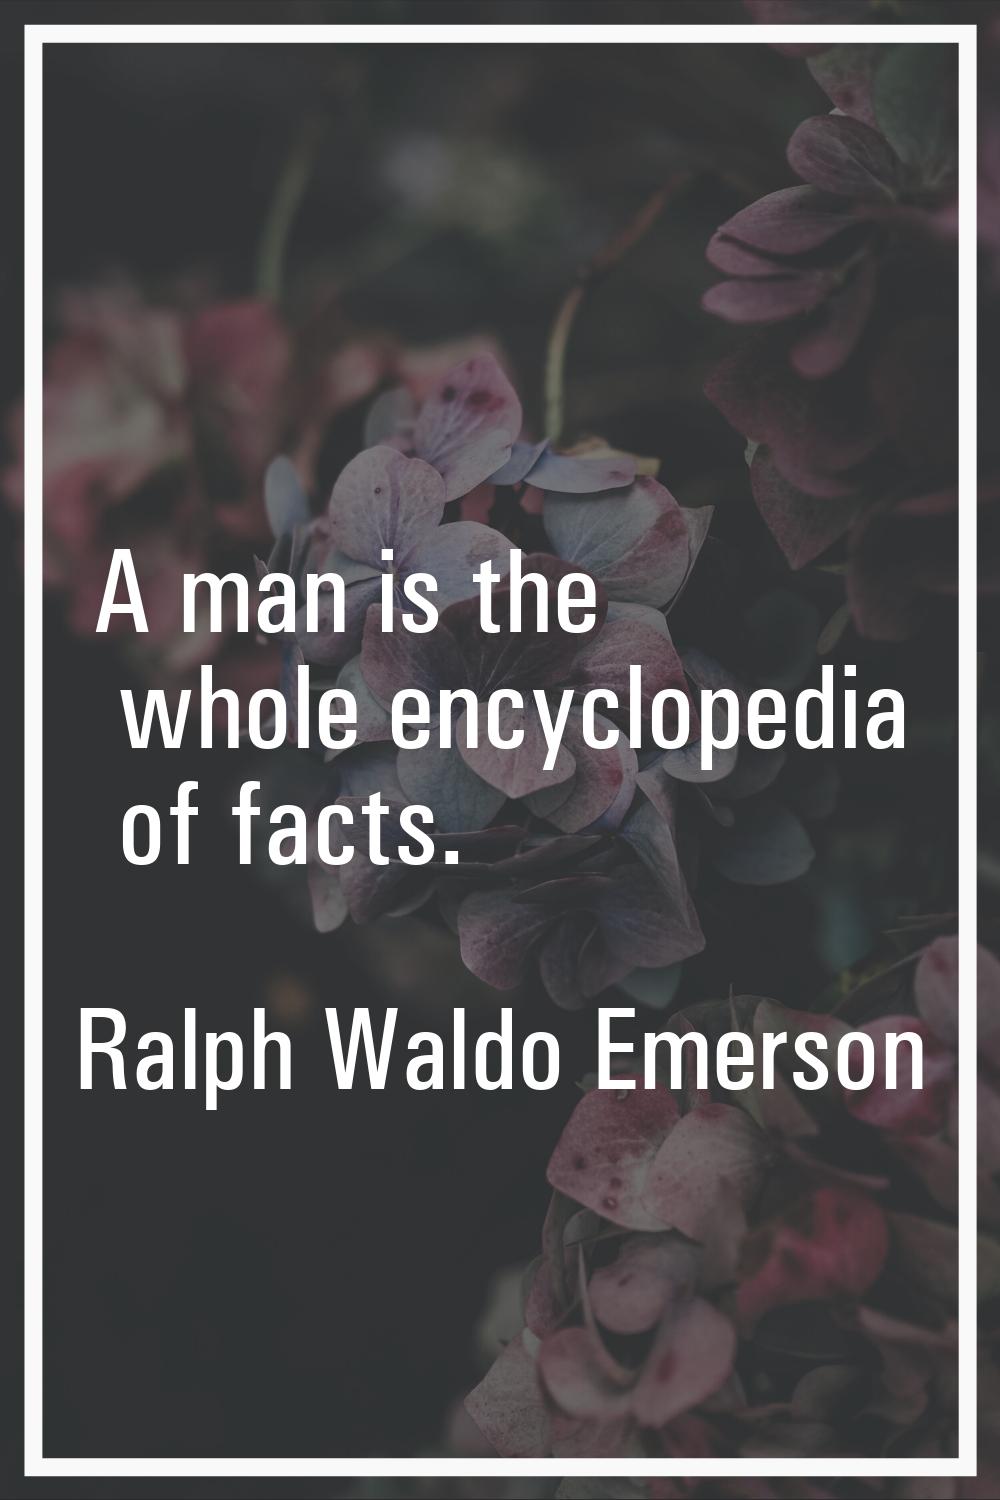 A man is the whole encyclopedia of facts.